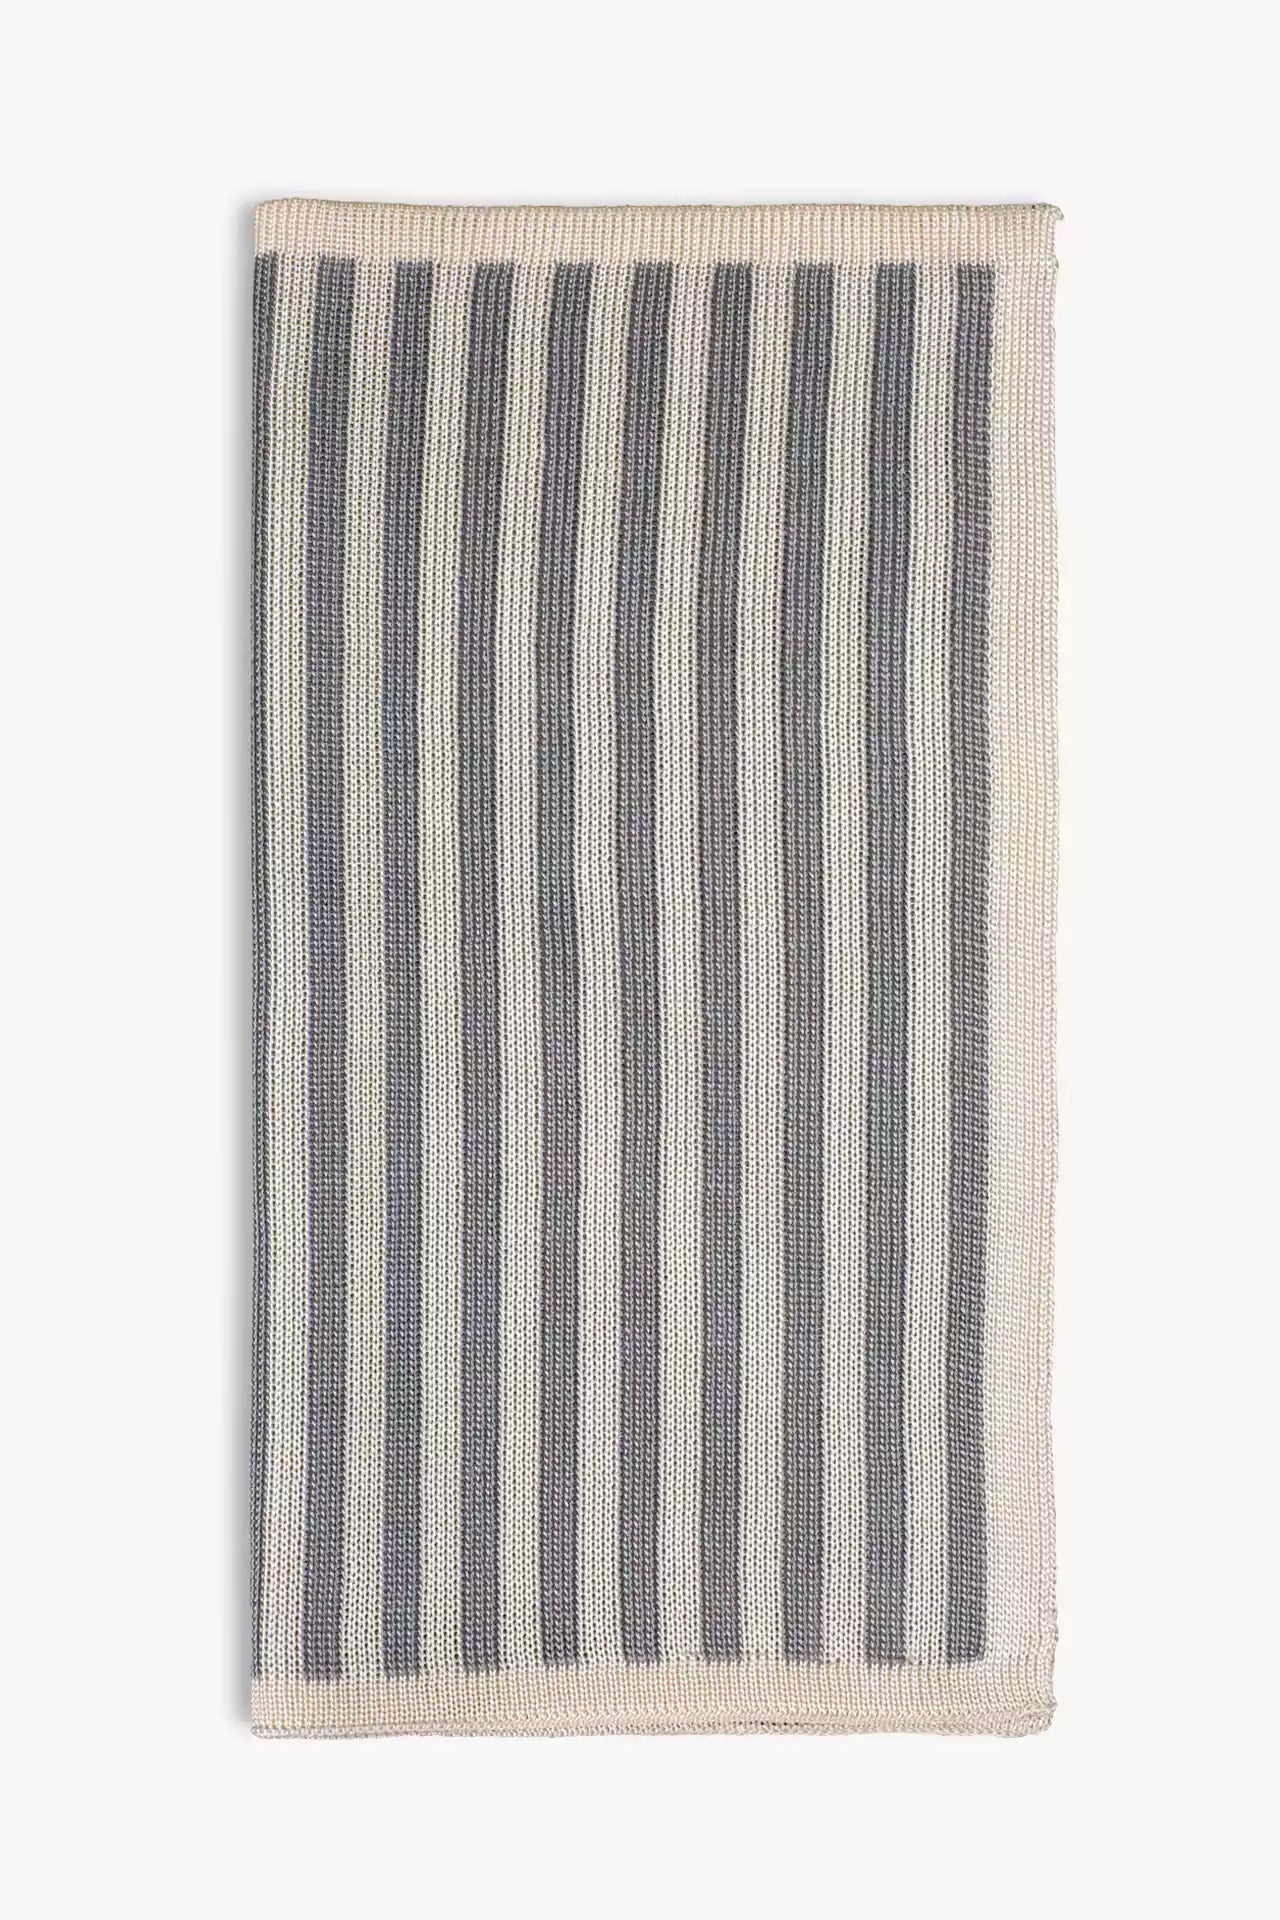 Gray and white striped knitted silk pocket square. Made in Italy.